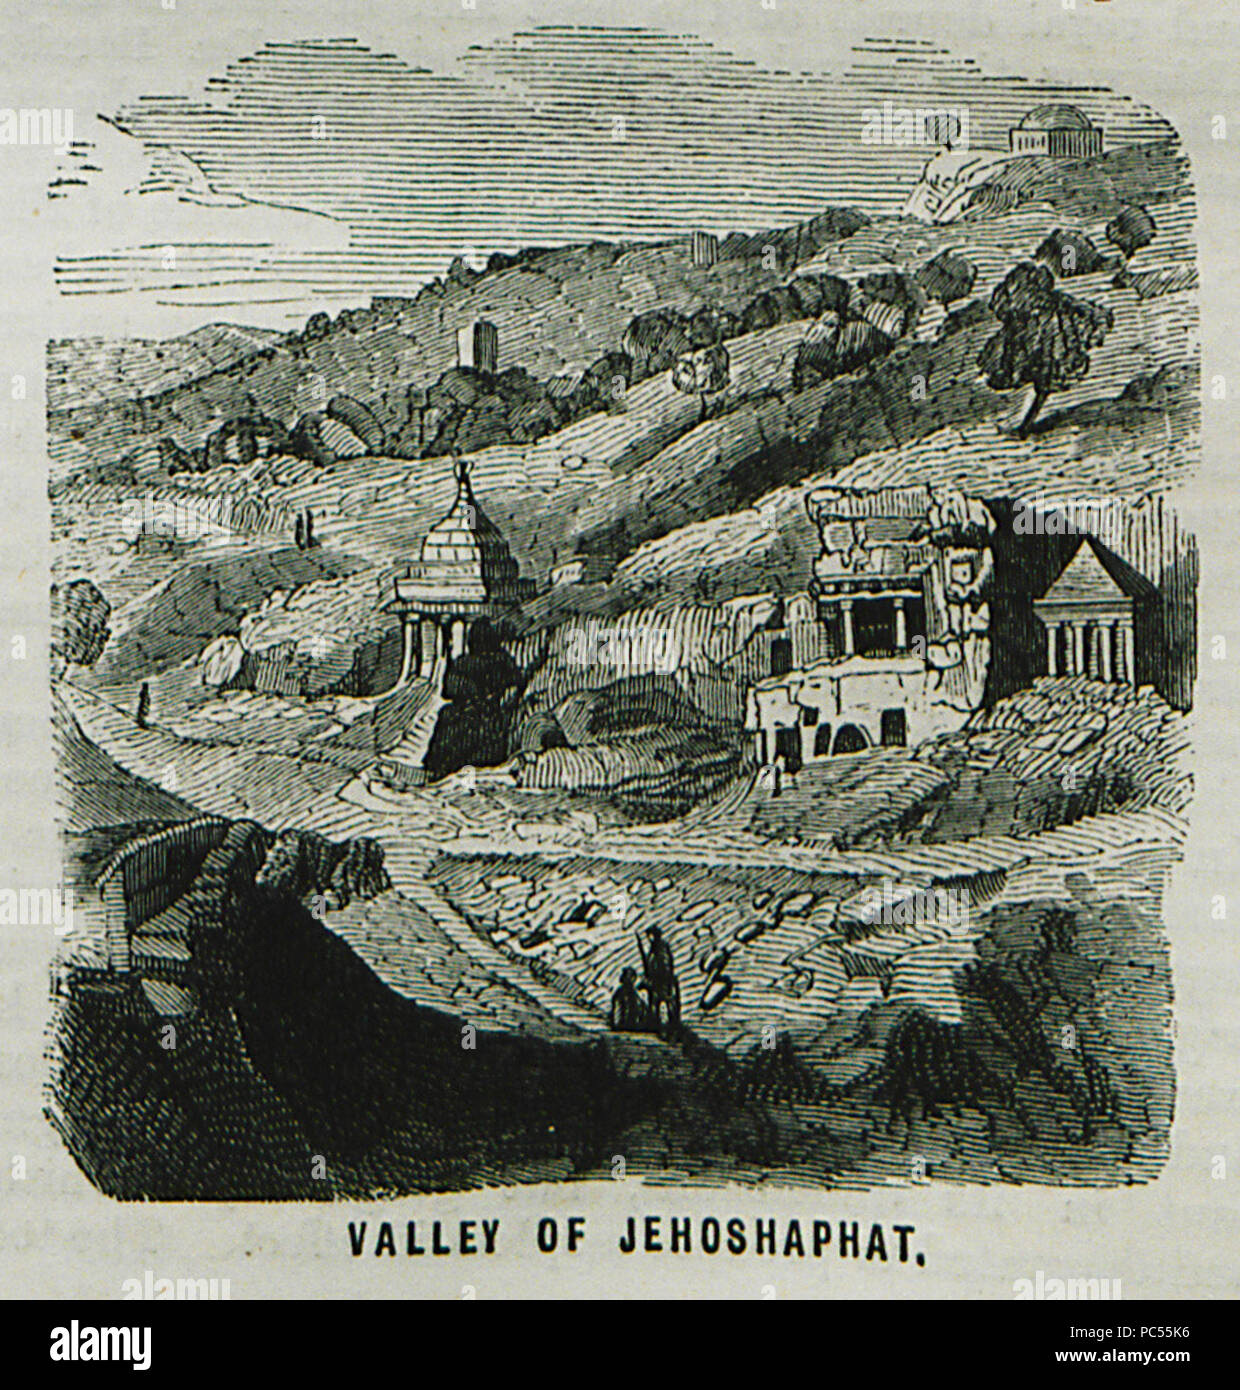 625 Valley of Jehoshaphat - Ainsworth William Francis - 1870 Stock Photo